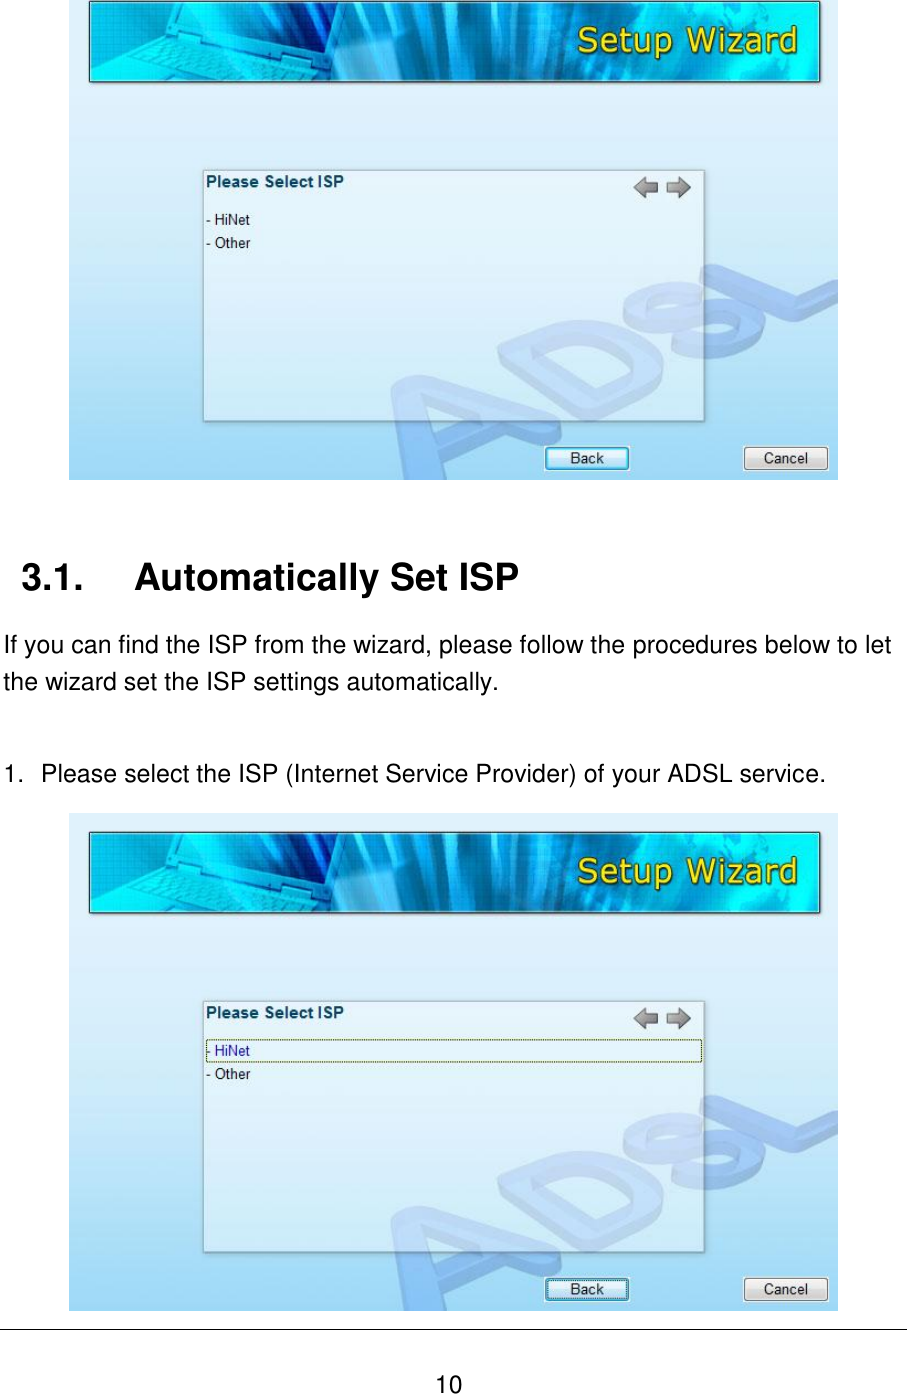   10    3.1.  Automatically Set ISP If you can find the ISP from the wizard, please follow the procedures below to let the wizard set the ISP settings automatically.  1.  Please select the ISP (Internet Service Provider) of your ADSL service.  